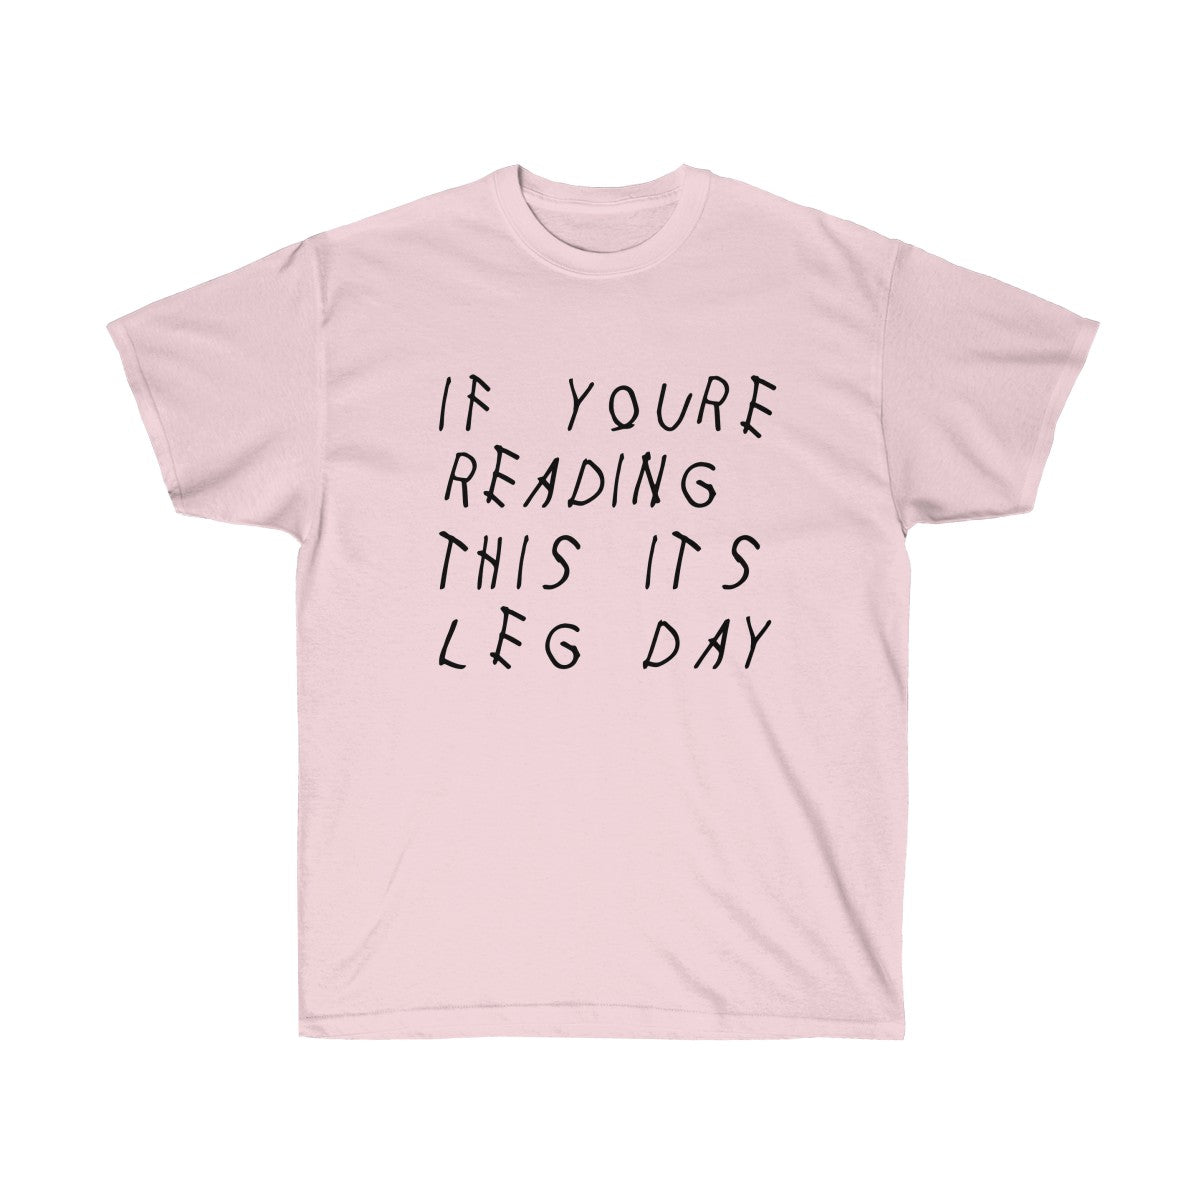 If your reading this it's leg day Drake inspired workout Tee-Light Pink-S-Archethype